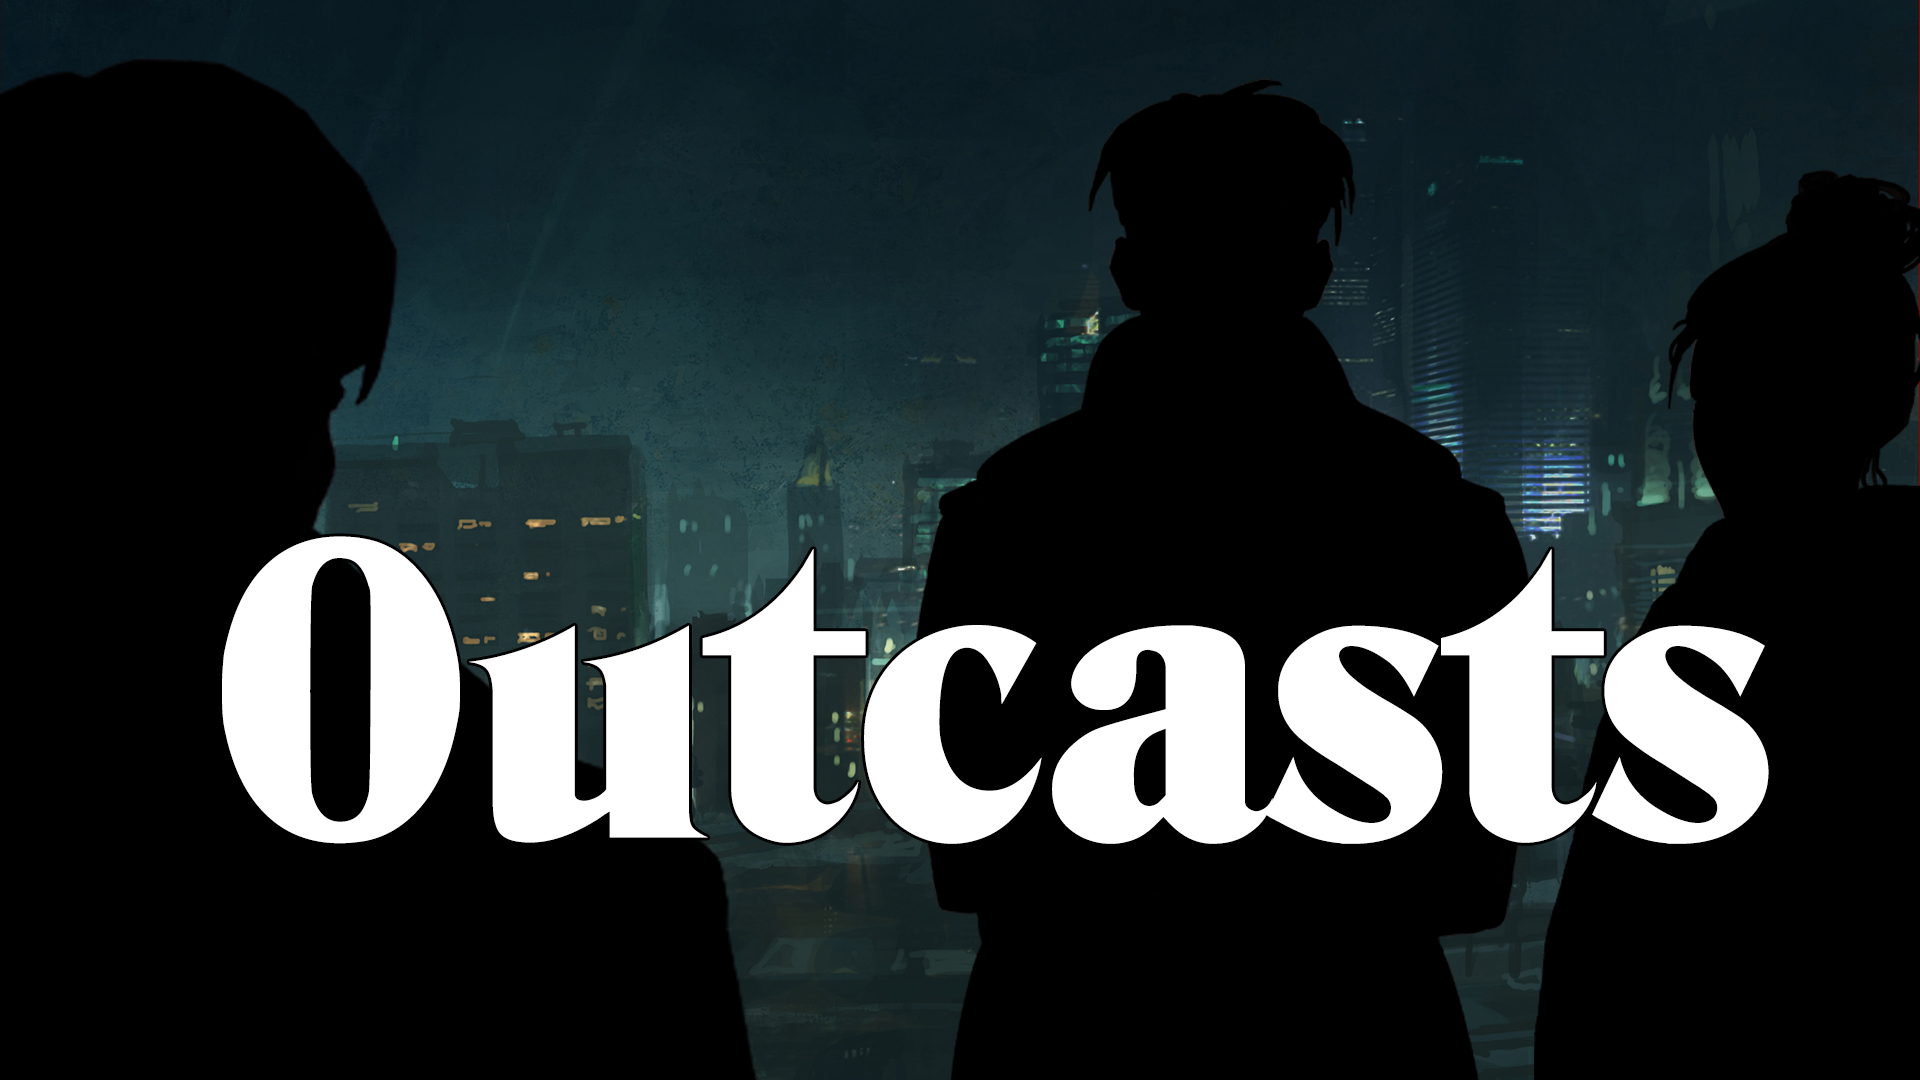 Vampire: Outcasts